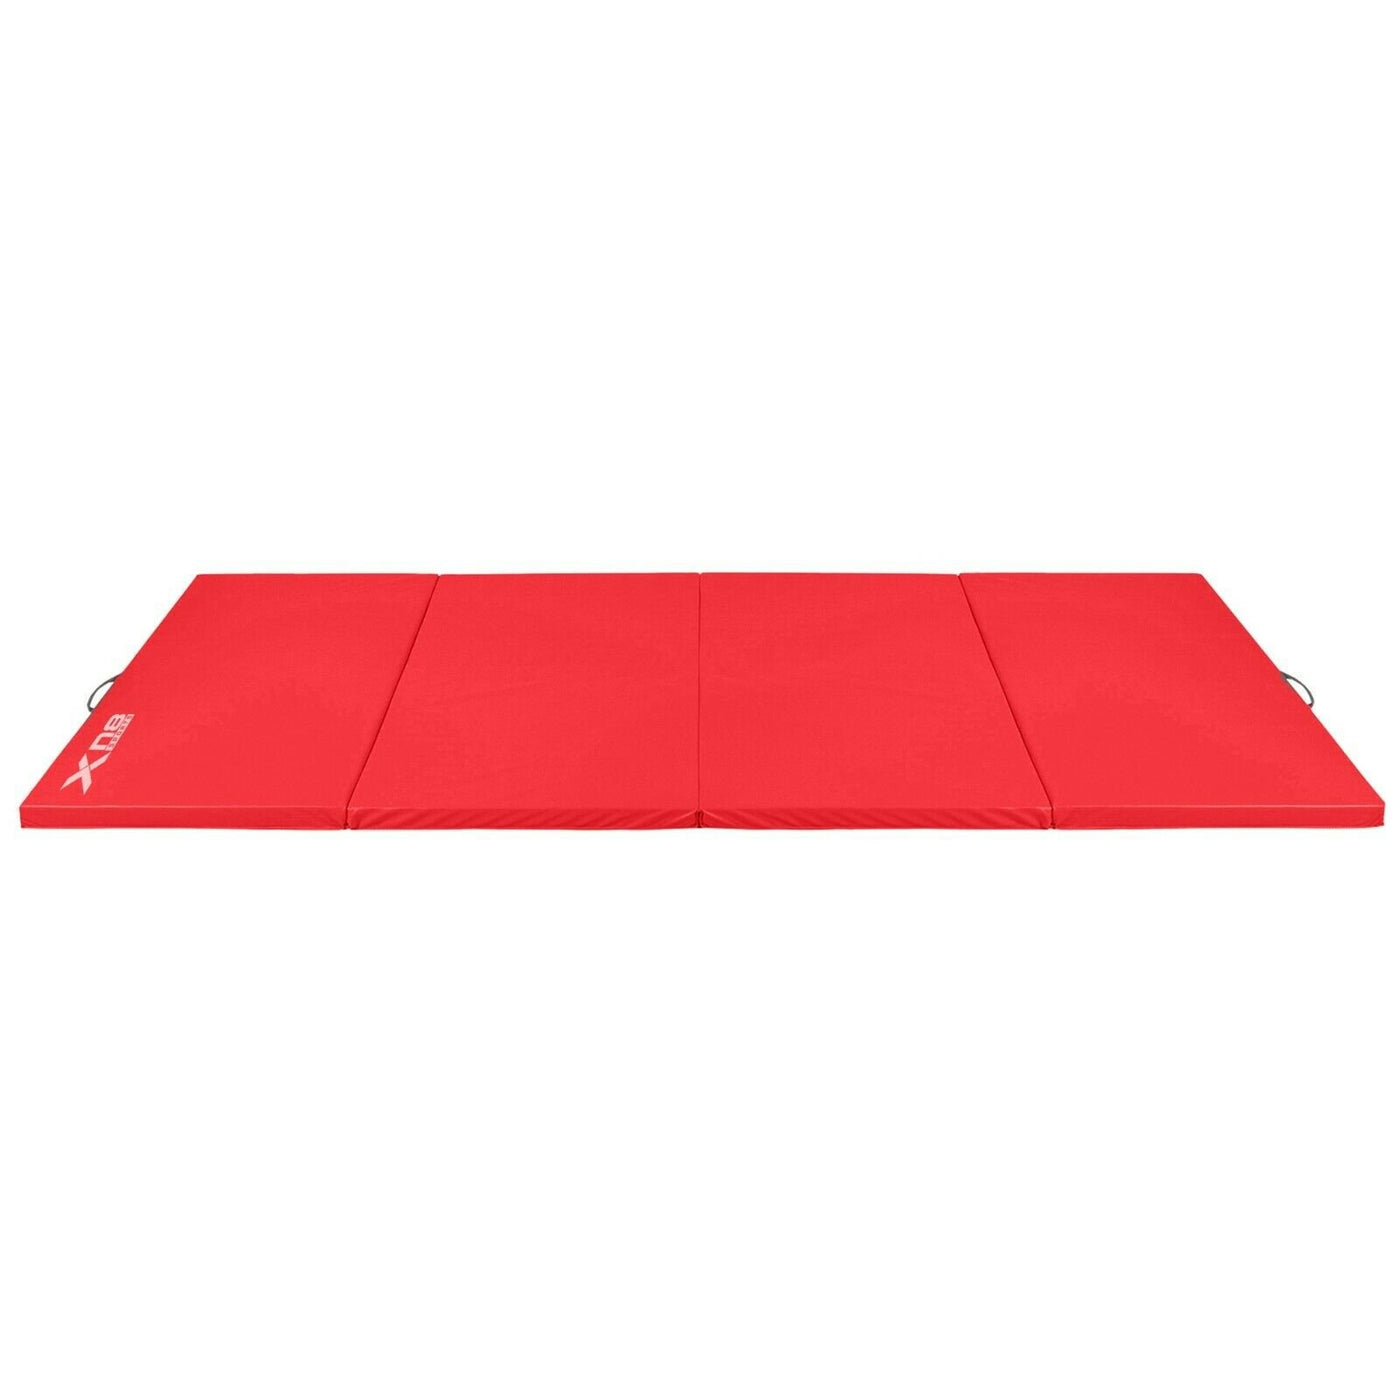 Xn8 Sports Gymnastic Mats For Sale Red